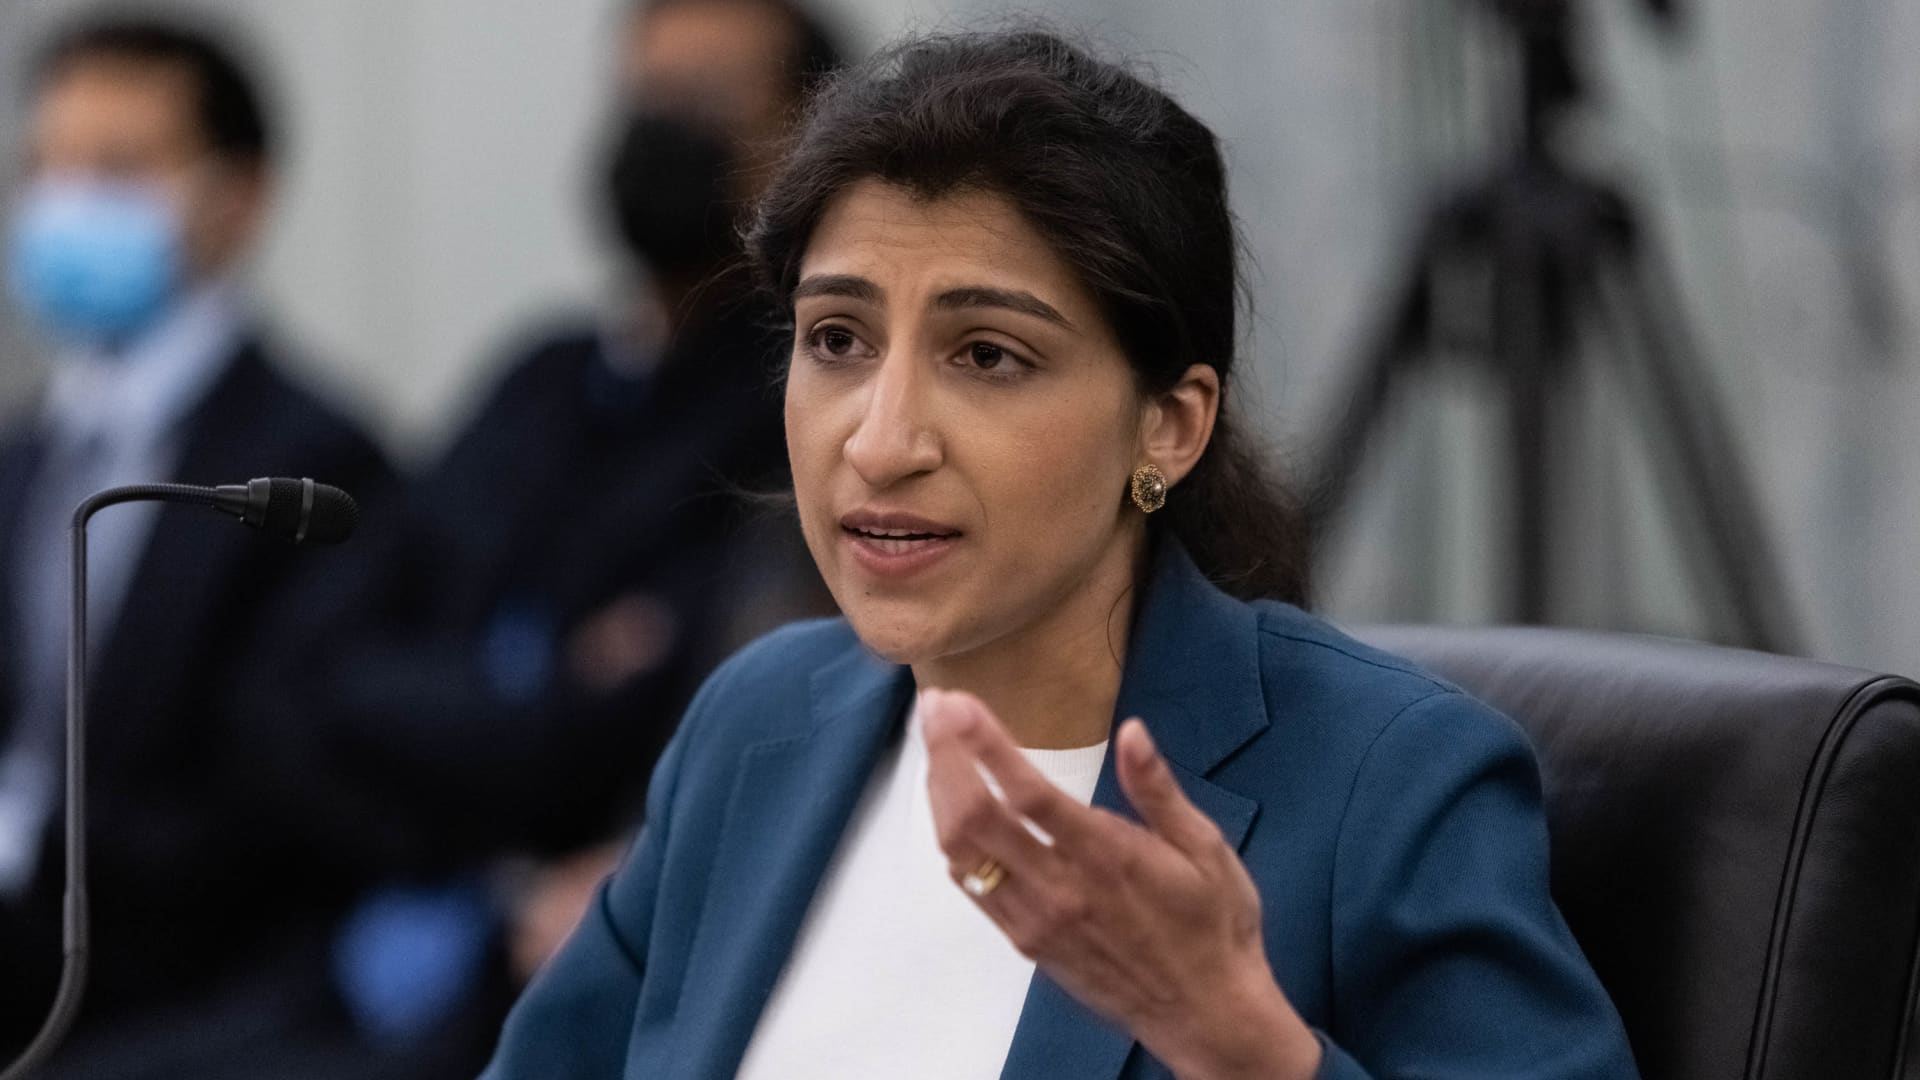 Antitrust enforcement can help the U.S. stay ahead of China on tech, FTC Chair Khan says